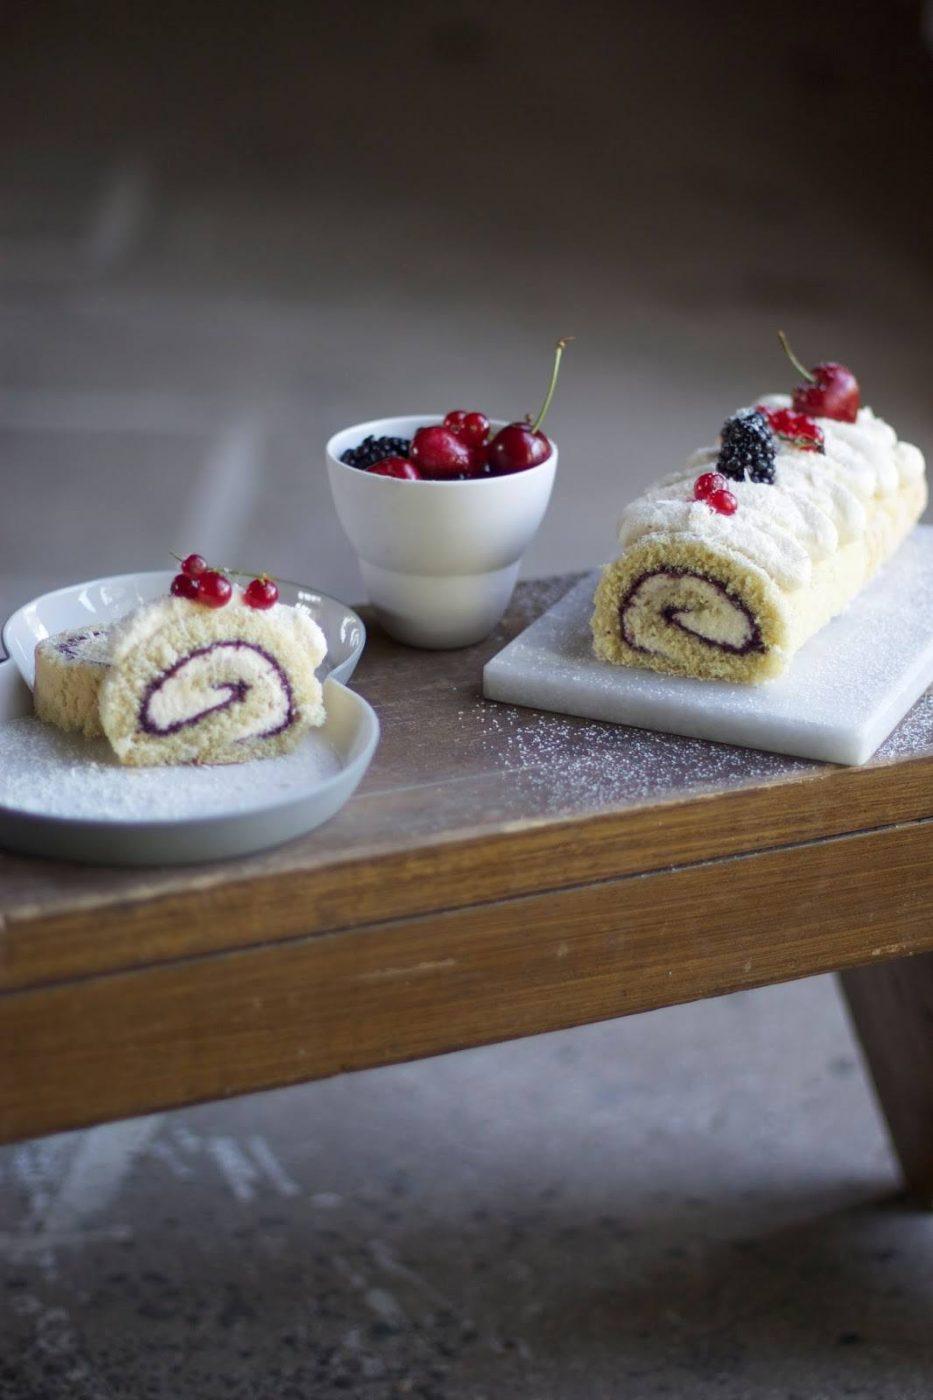 Image for Gluten-free Swiss Roll with Berries & White Chocolate